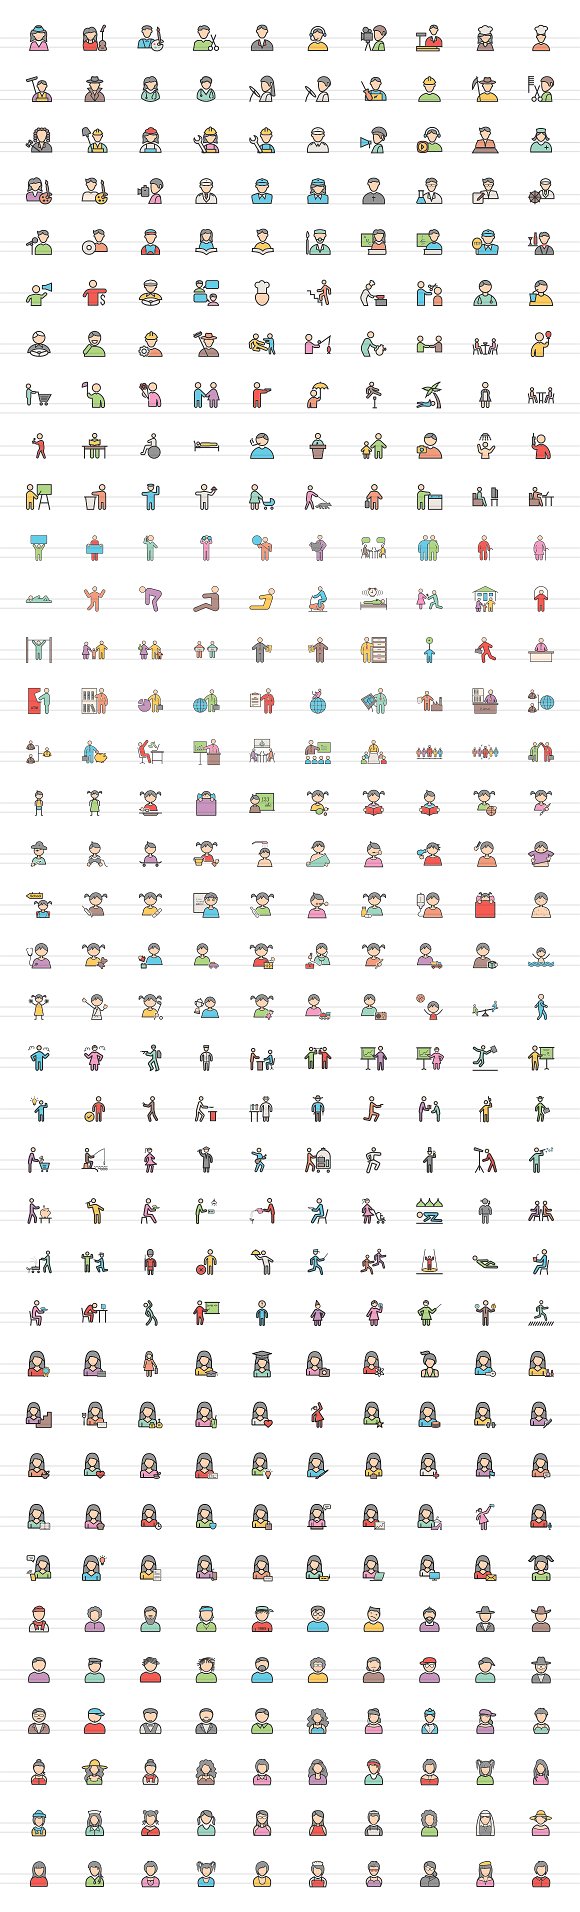 370 People FIlled Line Icons